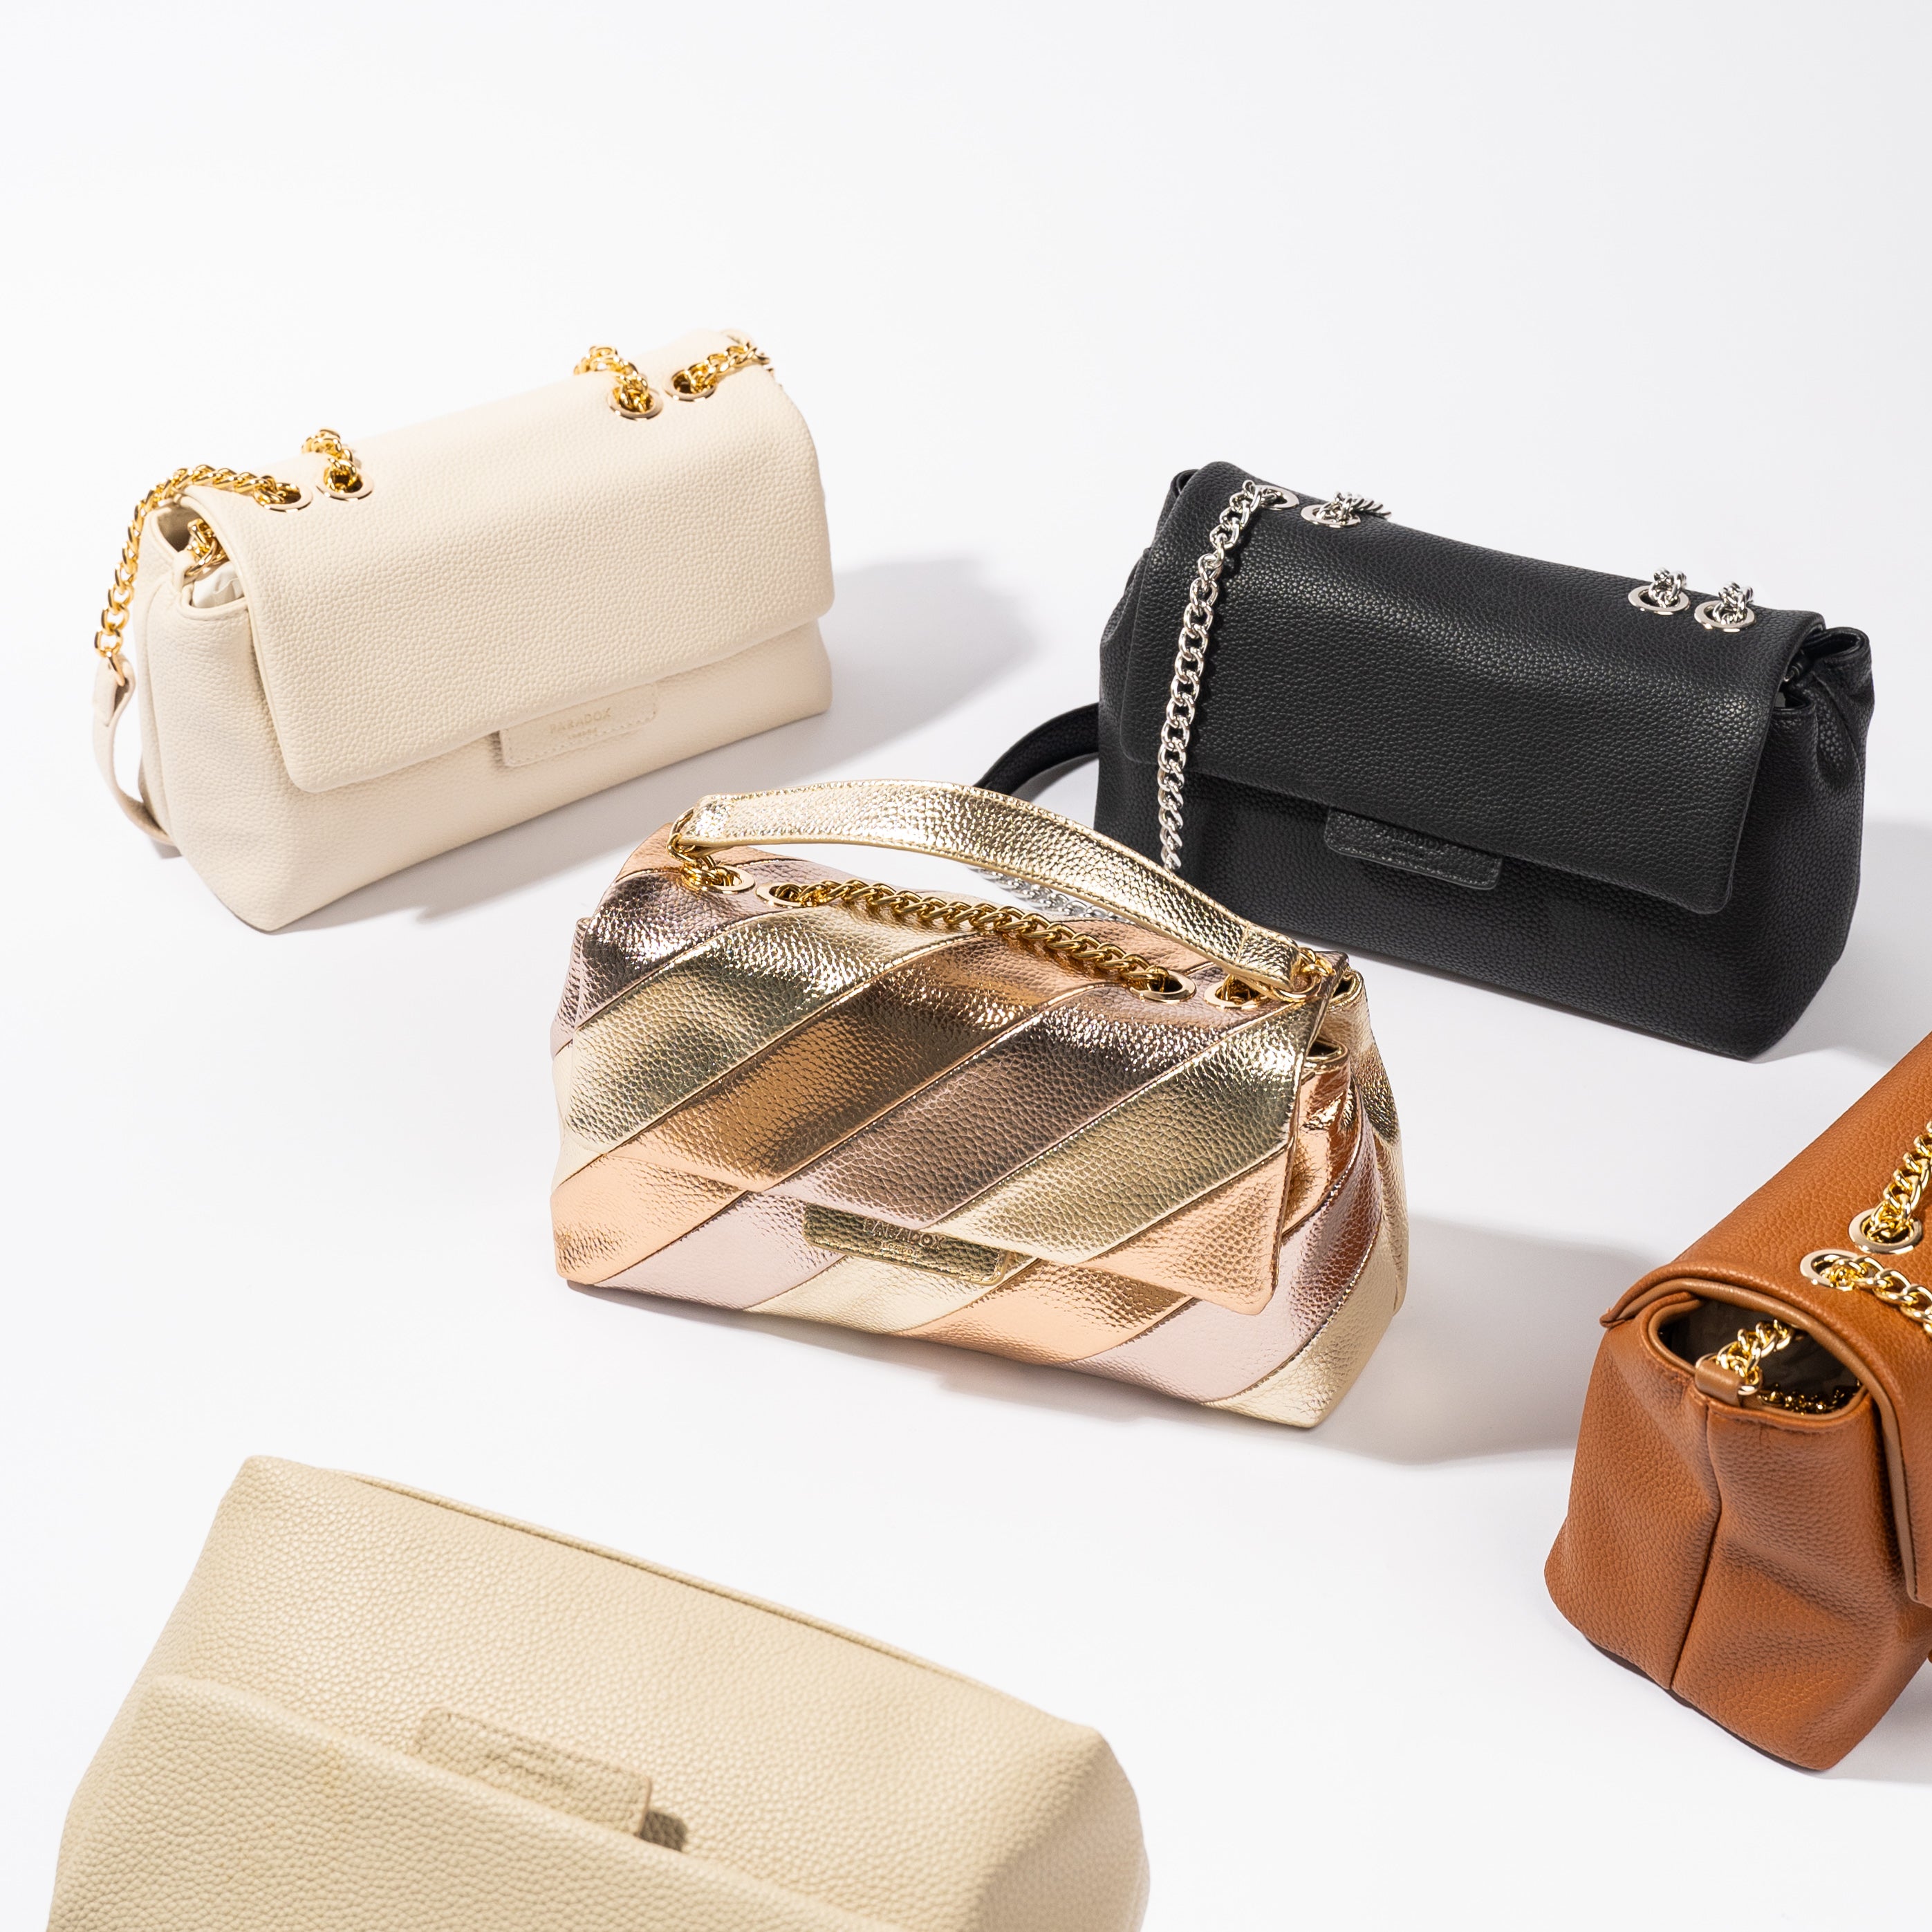 Discover the Perfect Day to Night Handbag for Your Style